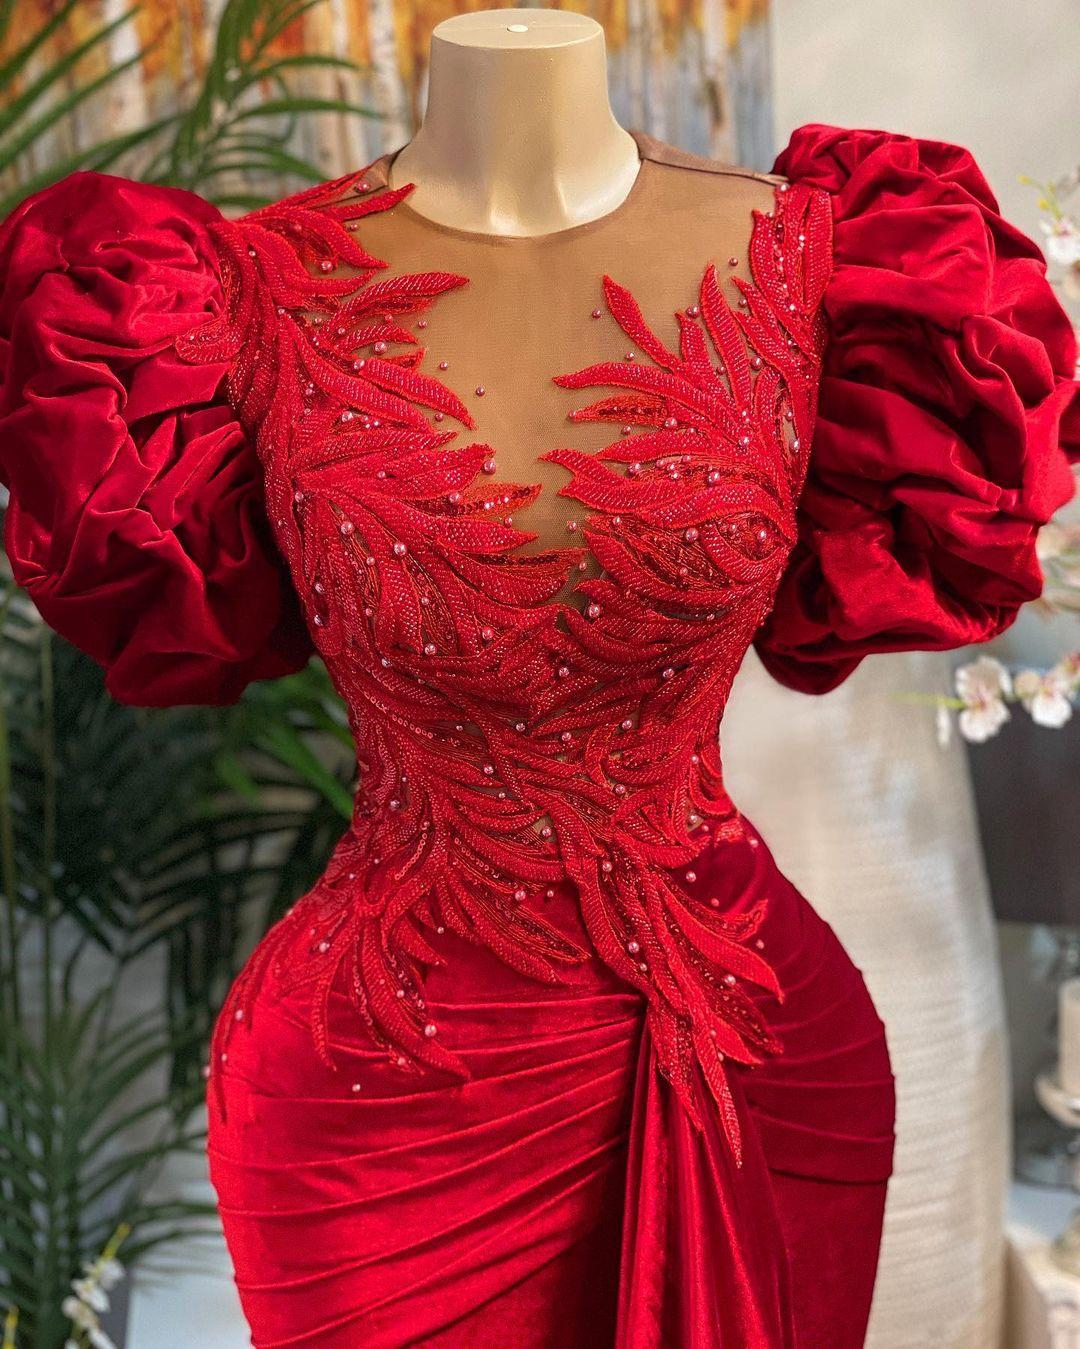 Luxury Red Mermaid Prom Dresses Lace Beaded Sheer Neck Evening Dress Formal Party Wear Y02